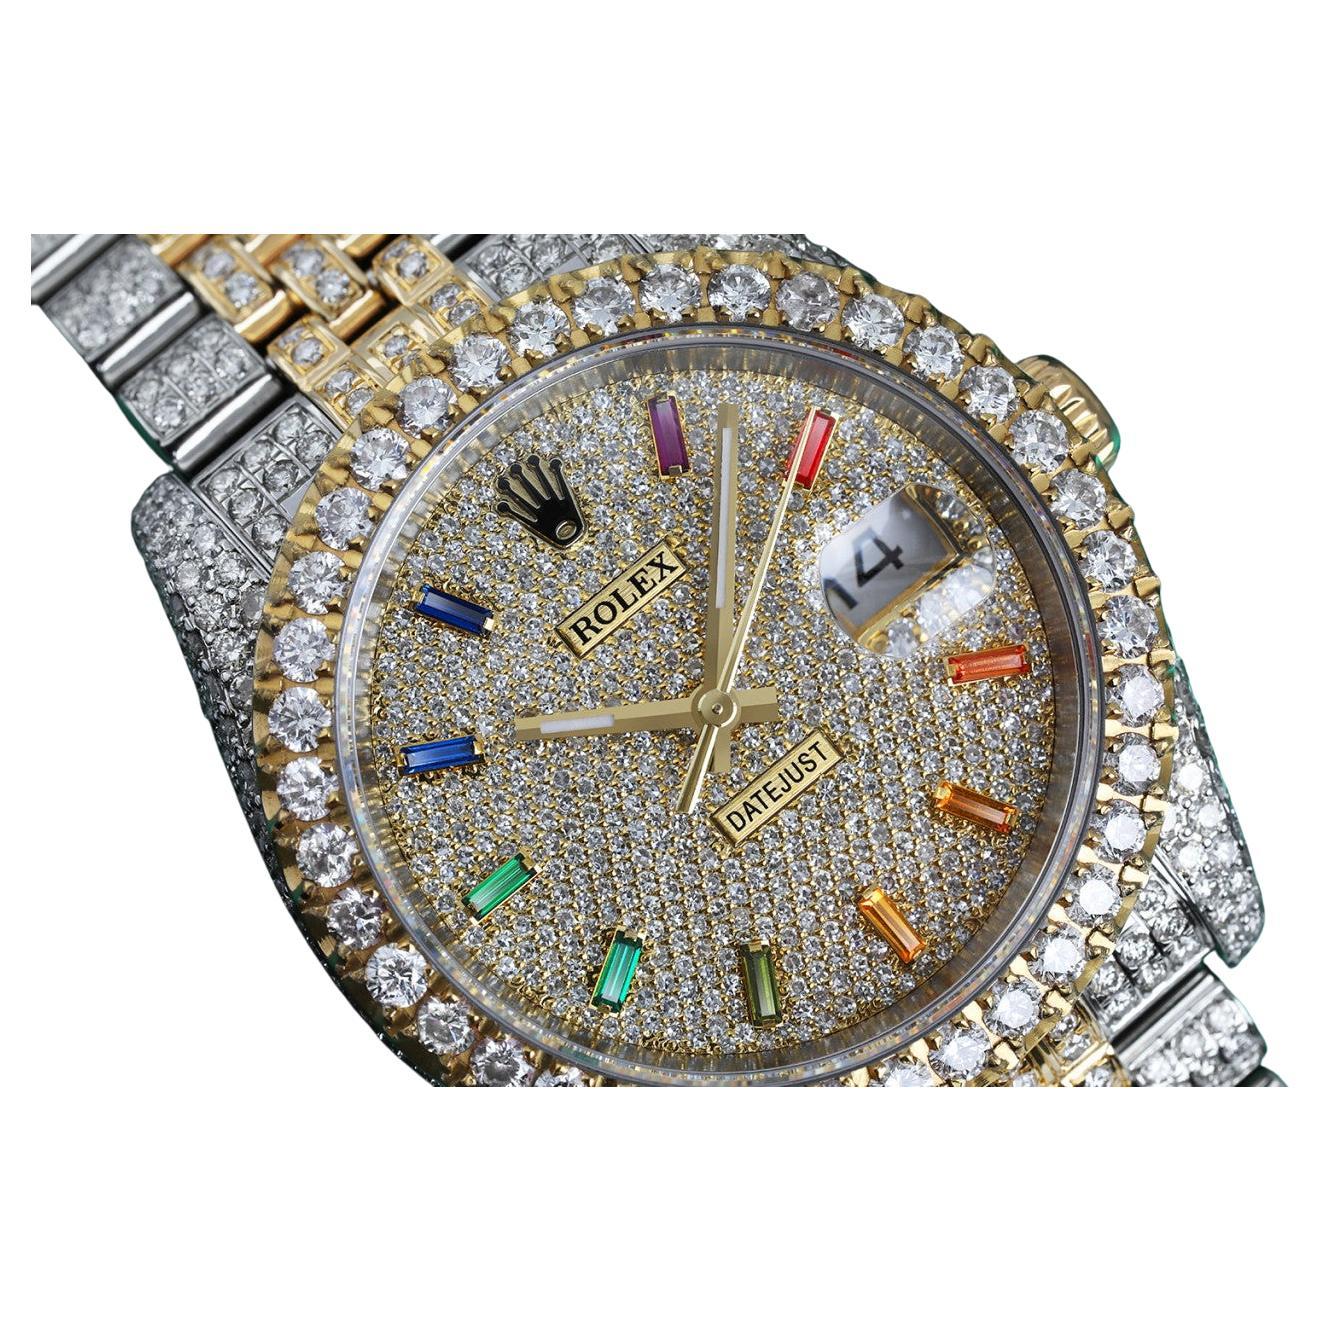 Rolex Datejus TwoTone Rainbow Index Pave Diamond Dial Fully Iced Out Watch For Sale